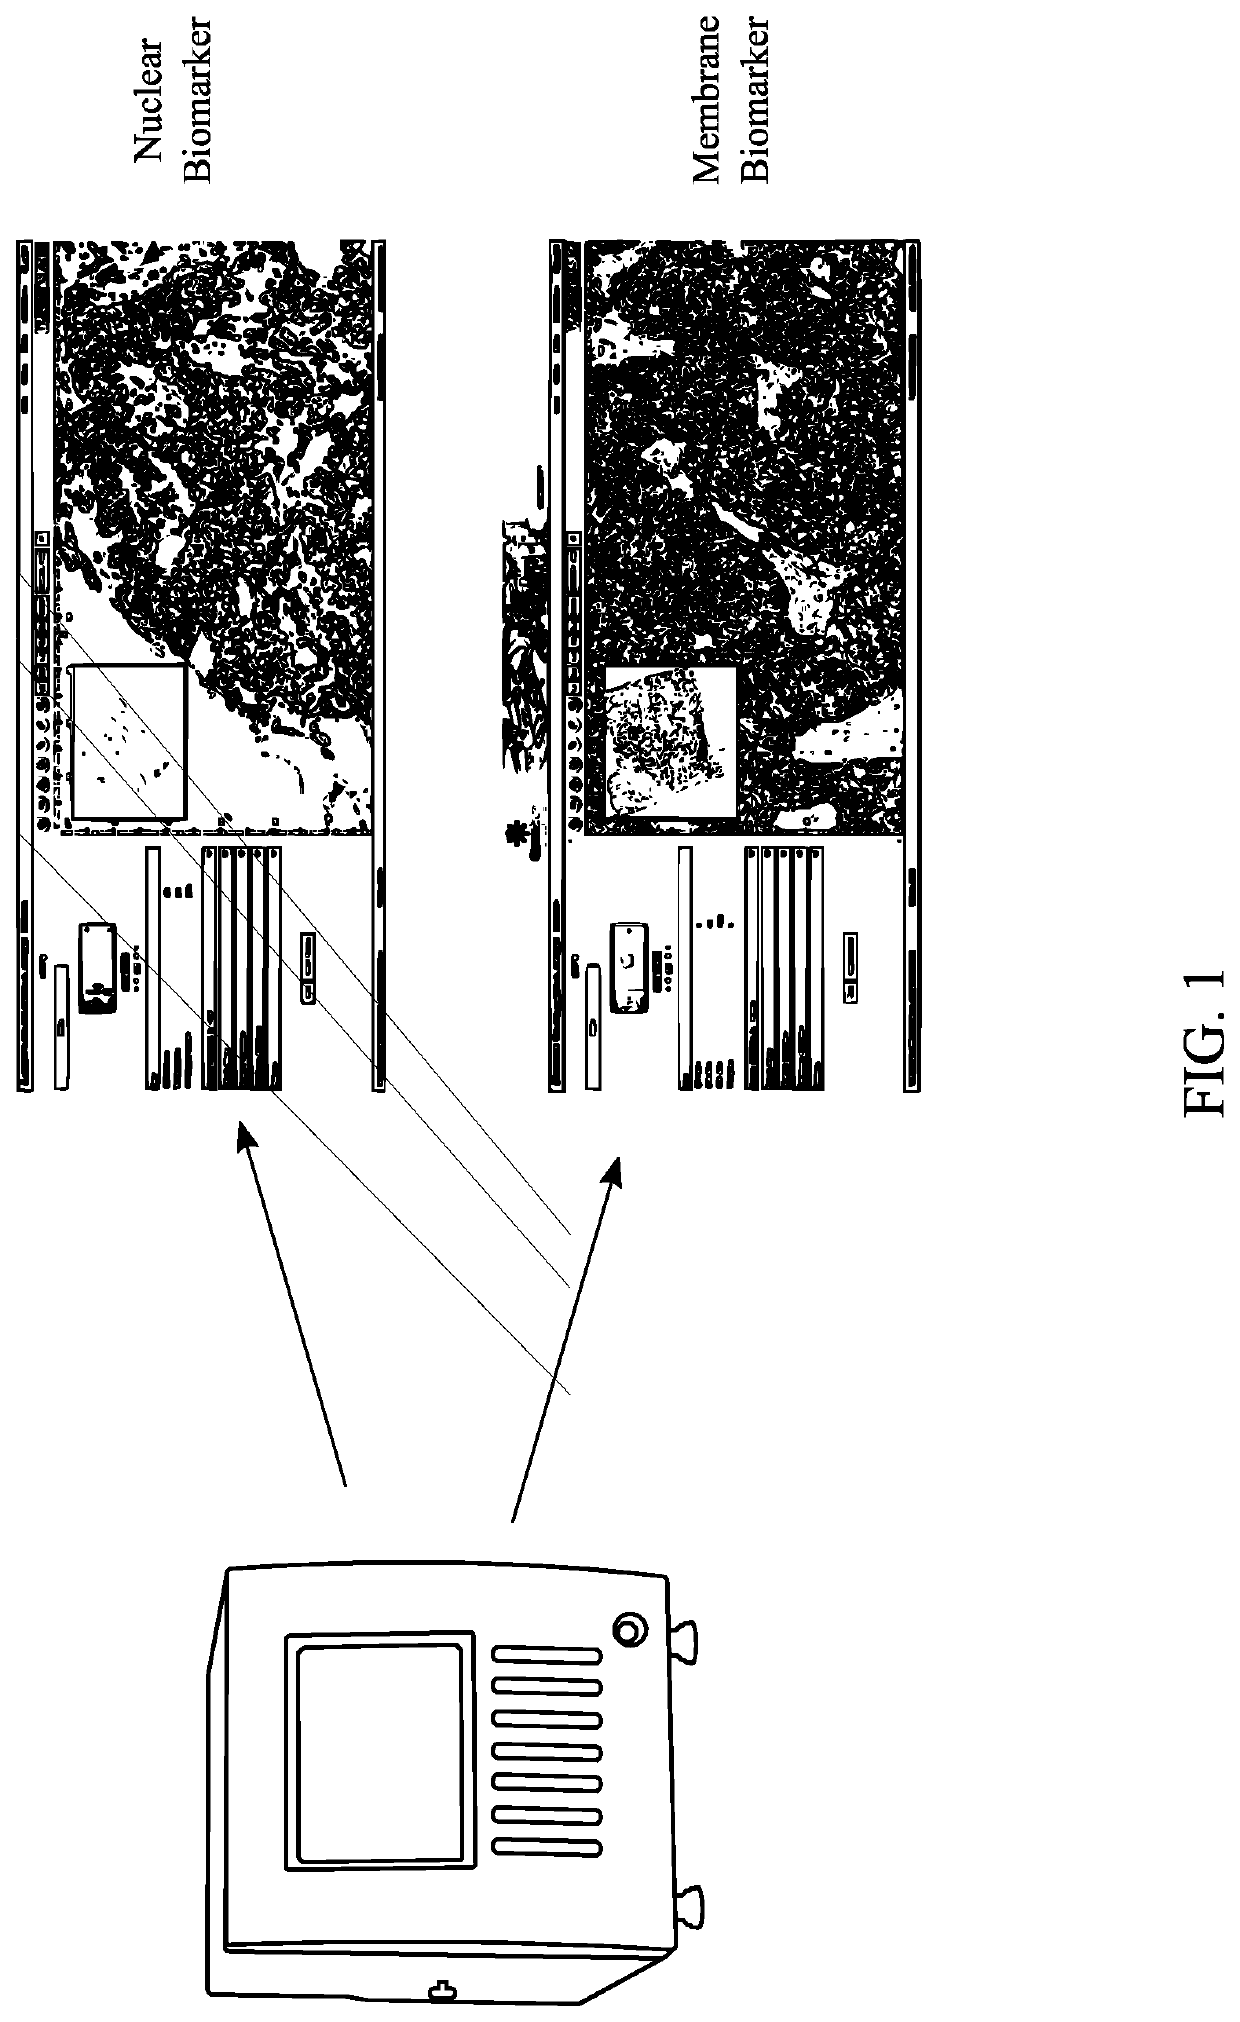 Method of Operation of An Artificial Intelligence-Equipped Specimen Scanning and Analysis Unit to Digitally Scan and Analyze Pathological Specimen Slides